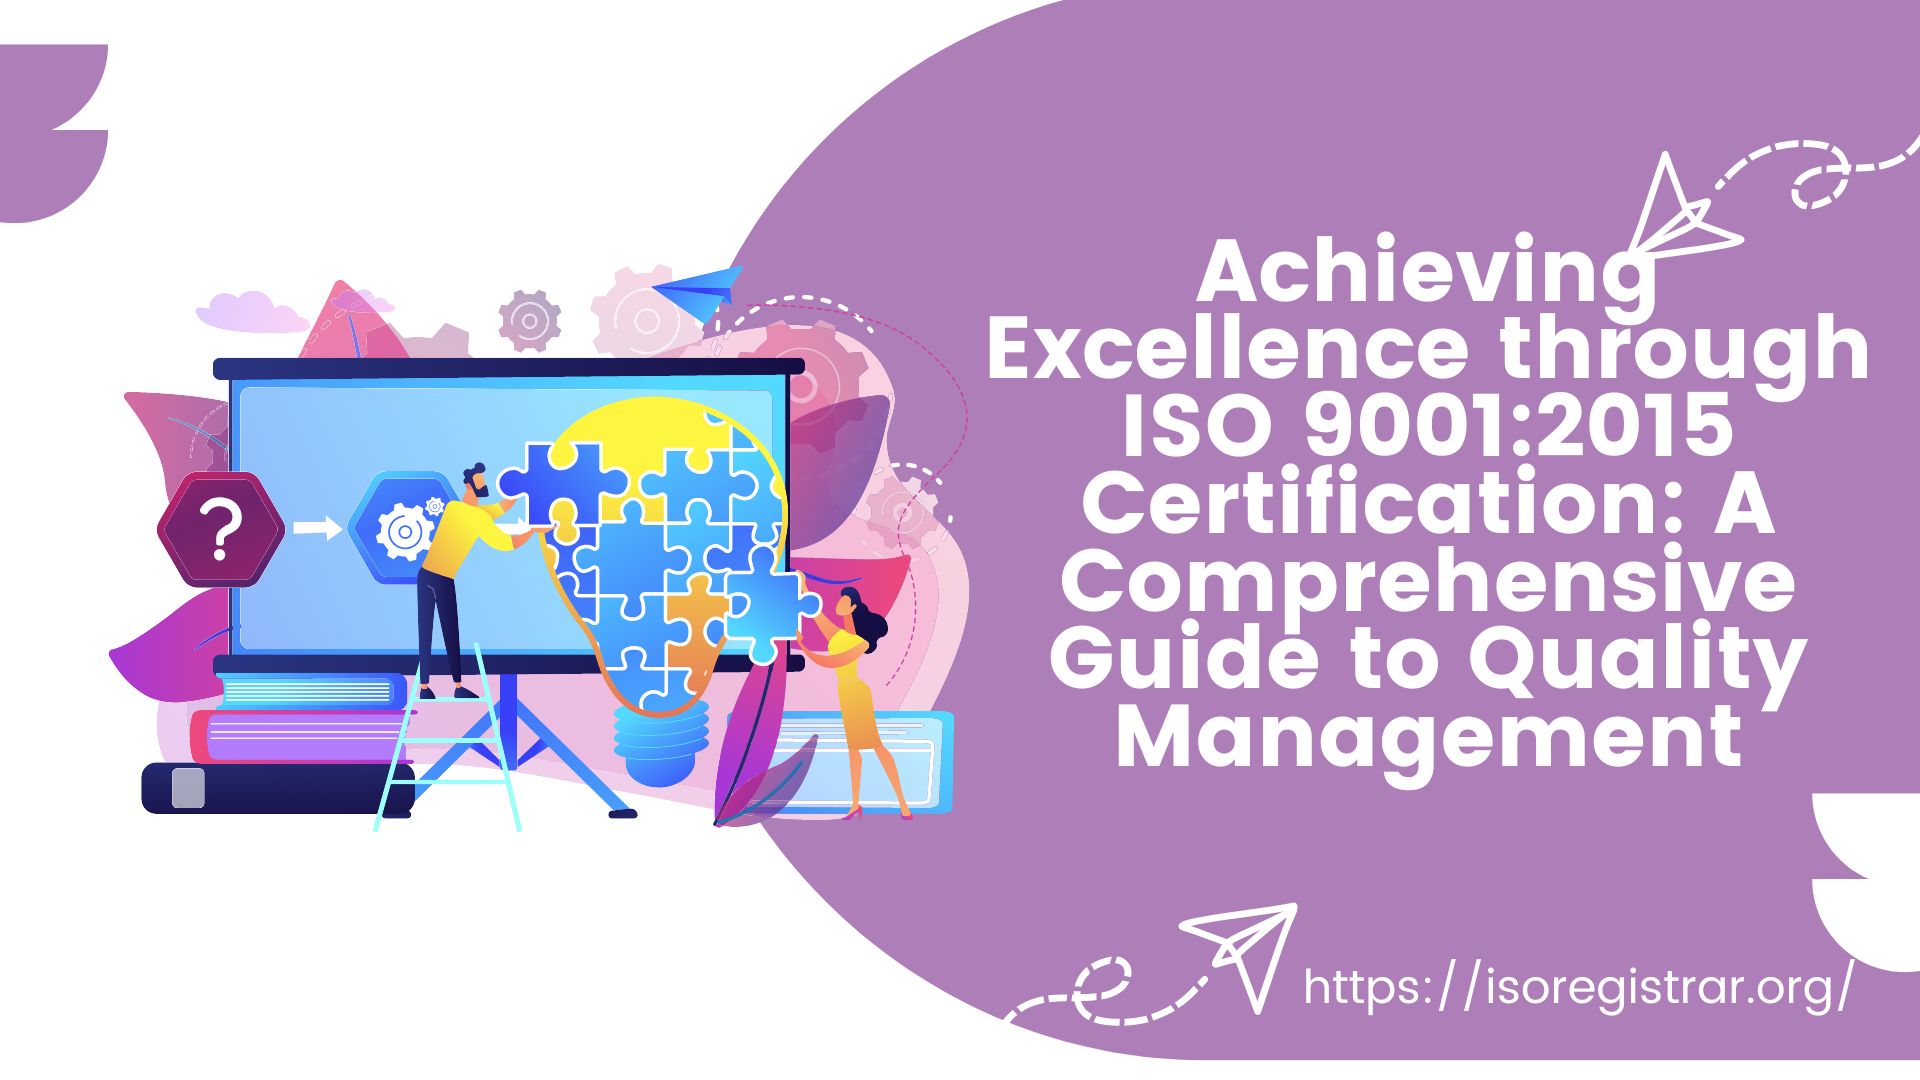 Achieving Excellence through ISO 9001:2015 Certification: A Comprehensive Guide to Quality Management